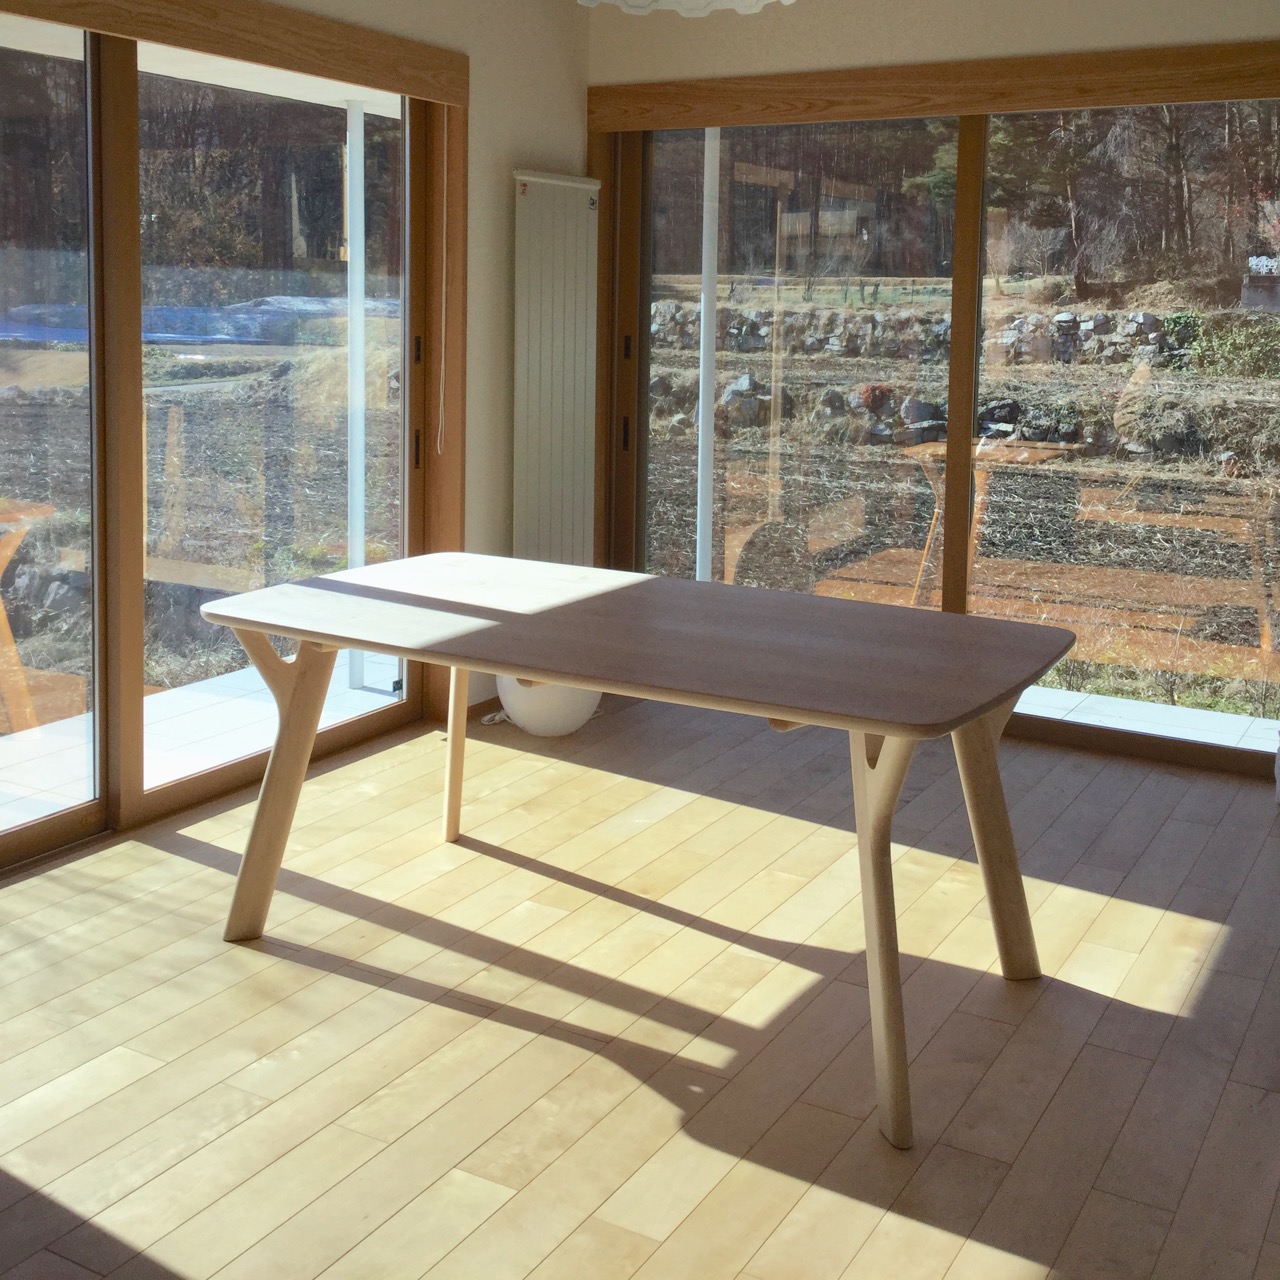 BRANCH Dining Table